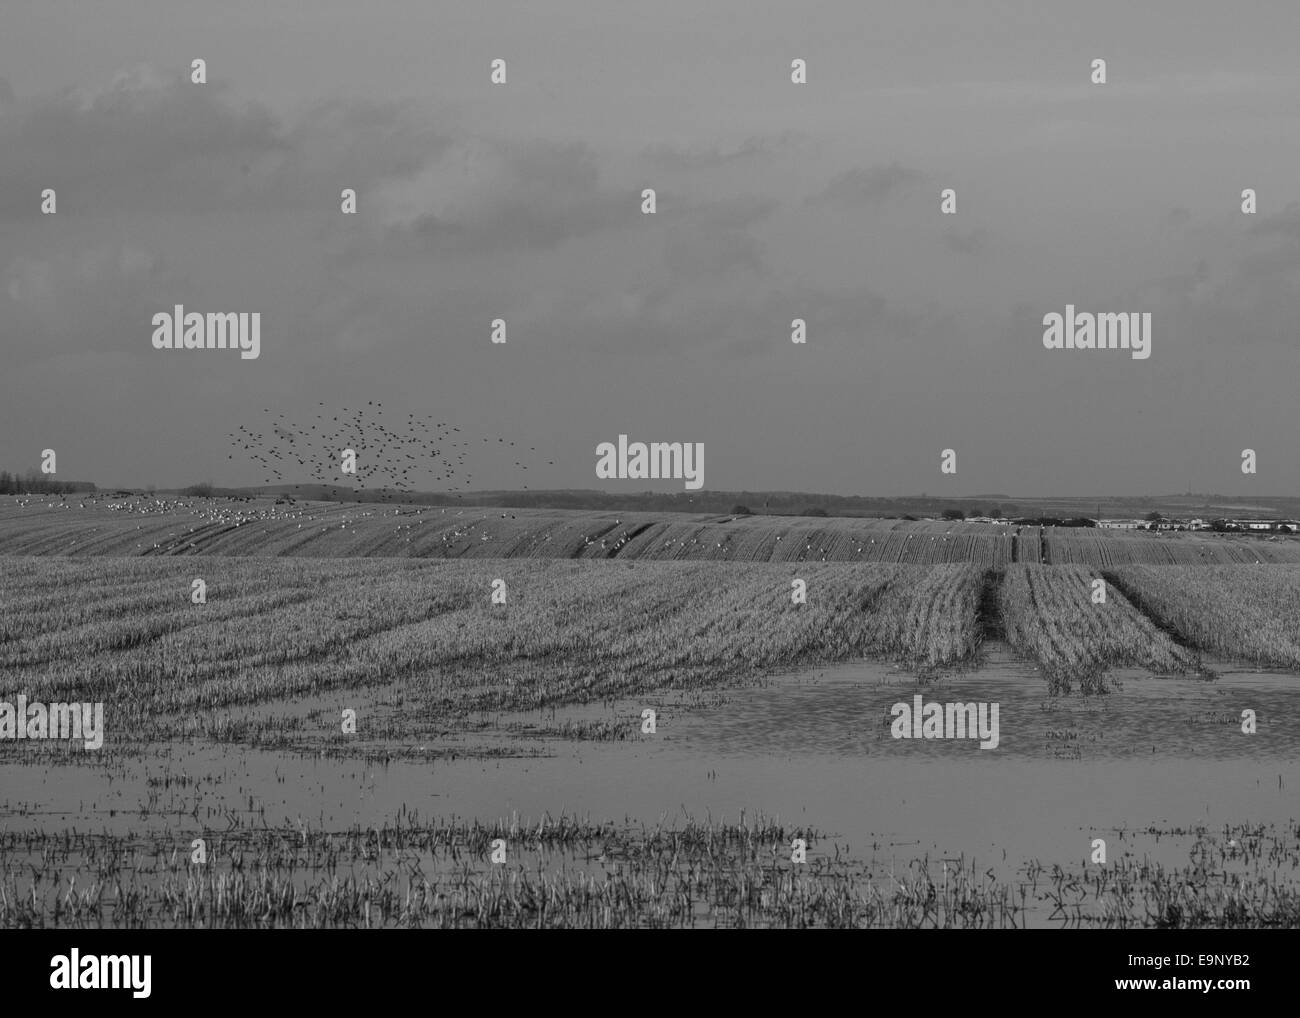 A farmers tractor leaves behind patterns in the field they grow crops in,Yorkshire, England, Stock Photo